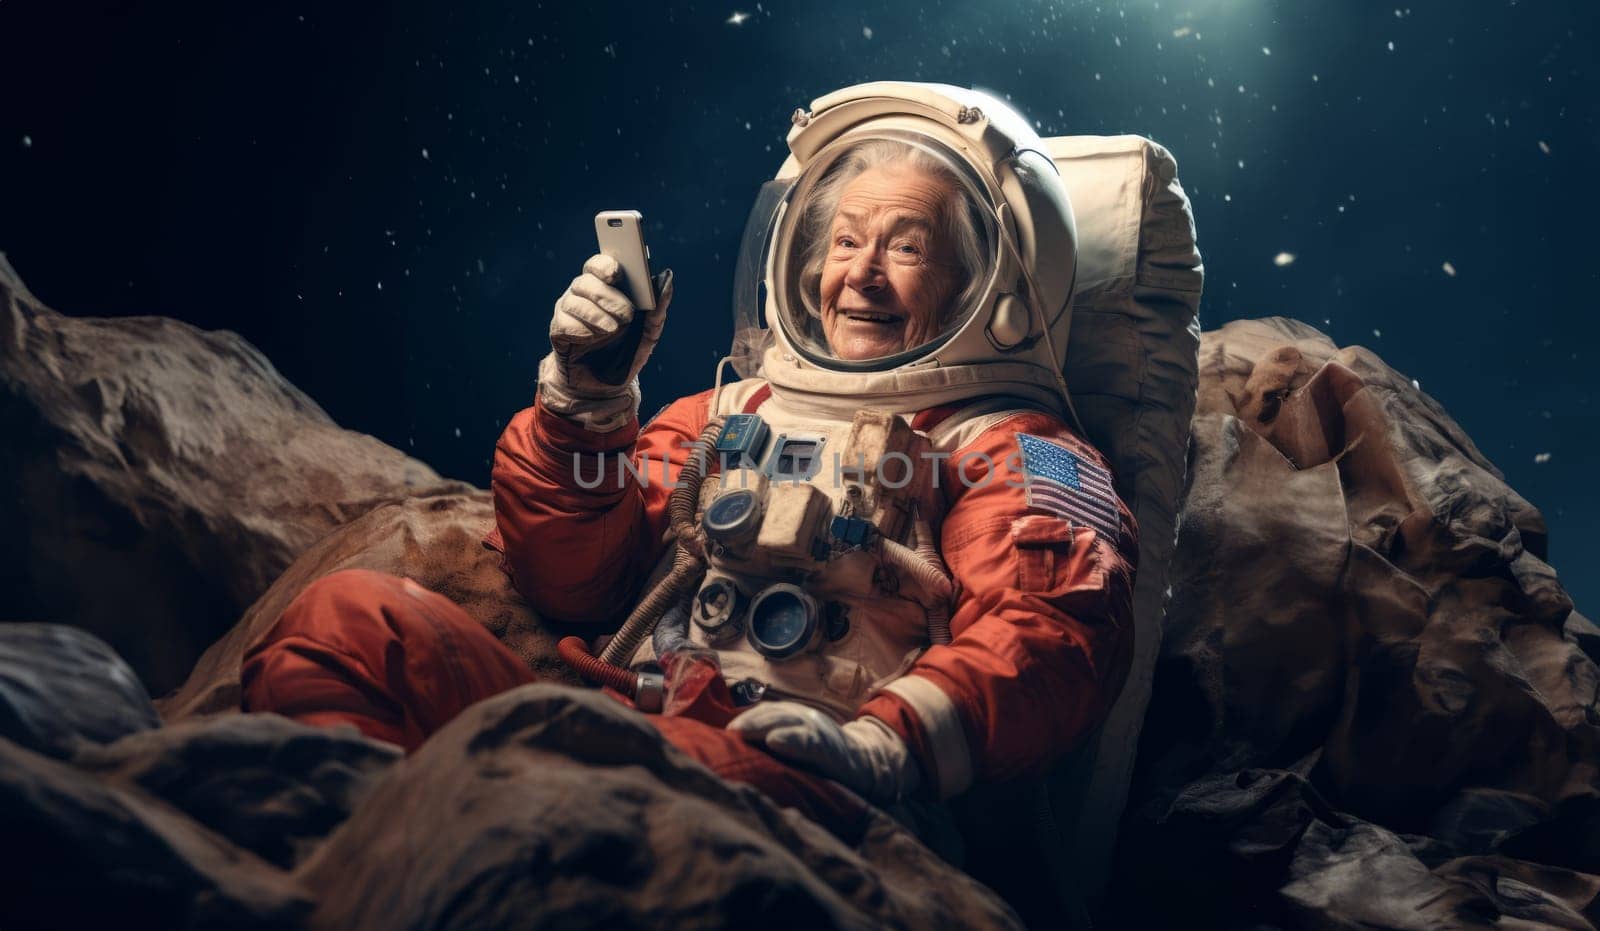 Astronaut Grandmother Uses Phone on the Moon.Generated image by dotshock